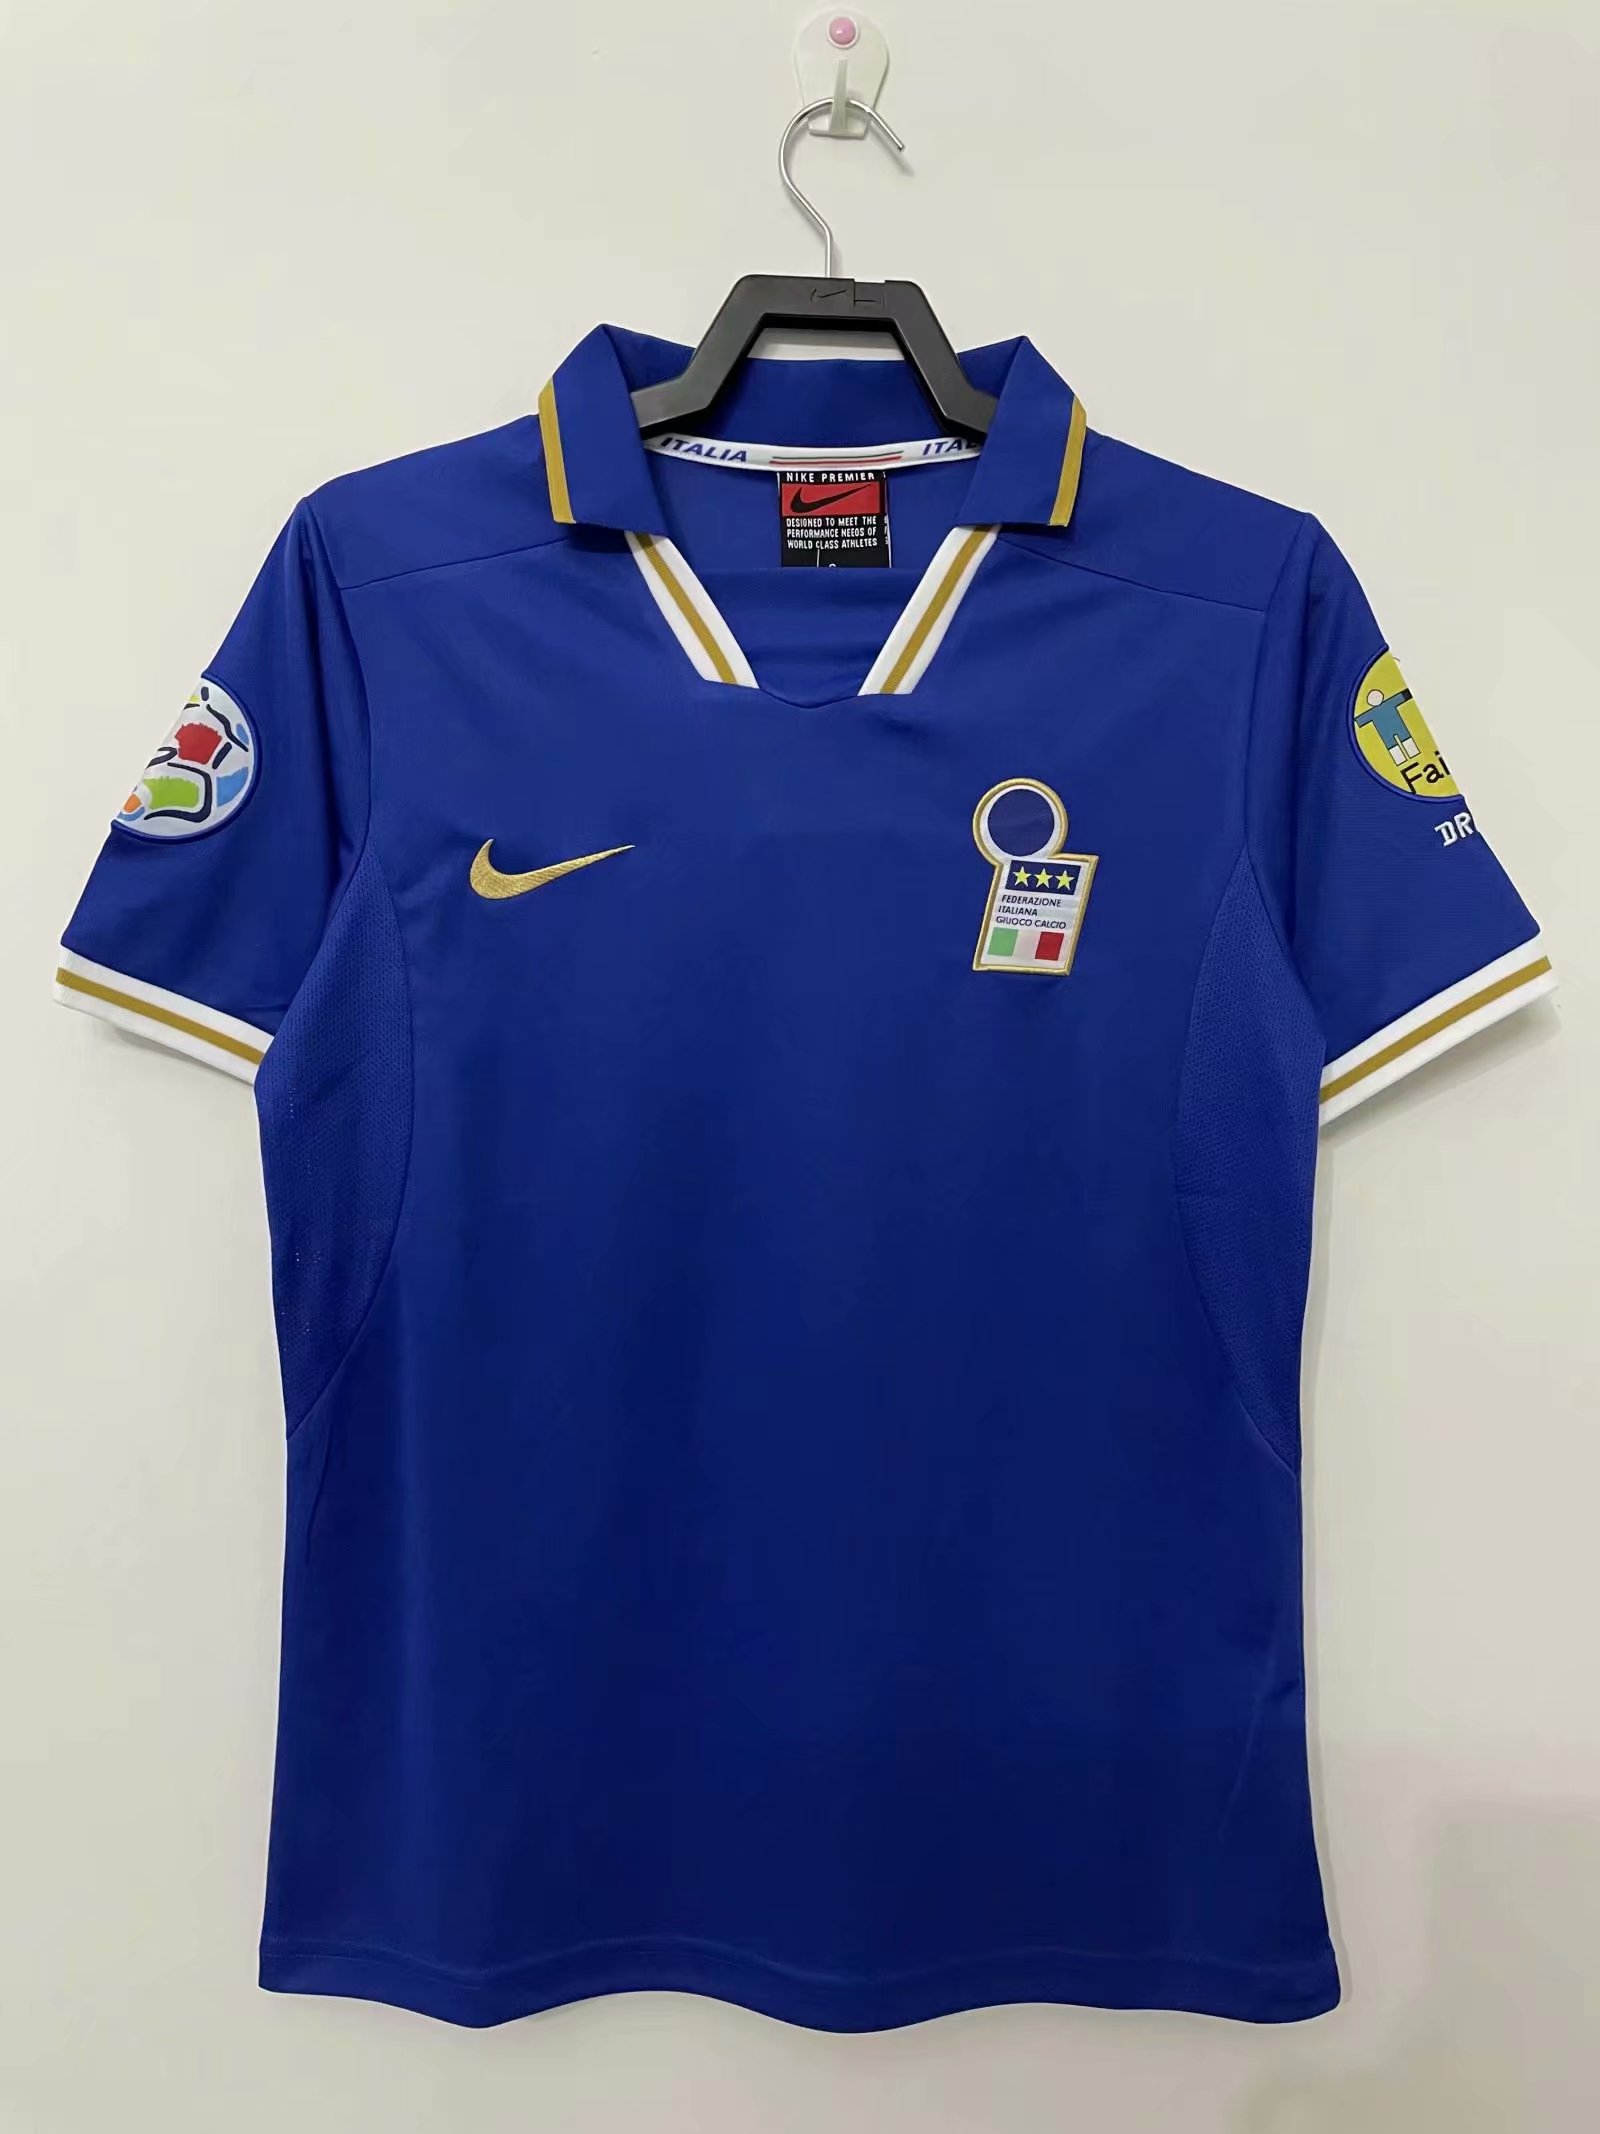 96 With Patch Retro Version Italy Home Blue Thailand Soccer Jersey AAA-811/709